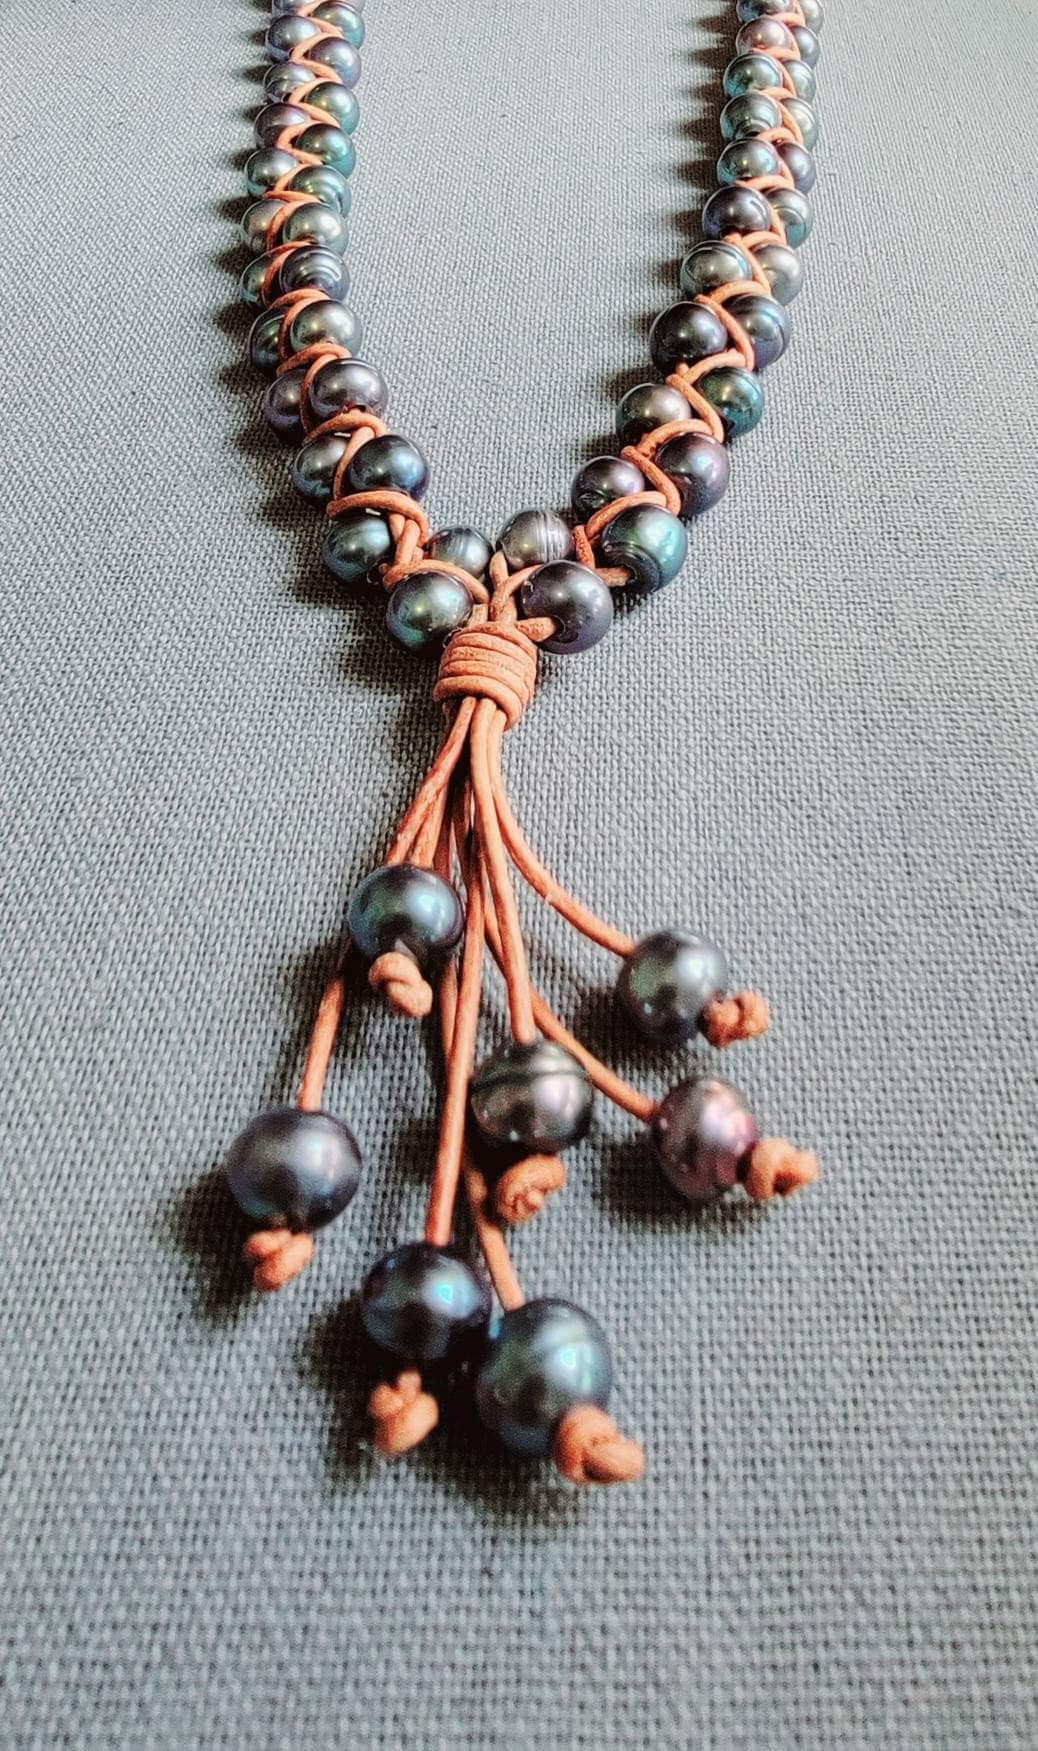 Braided Leather Necklace adorned with Peacock Pearls, 3rd Anniversary gift for wife